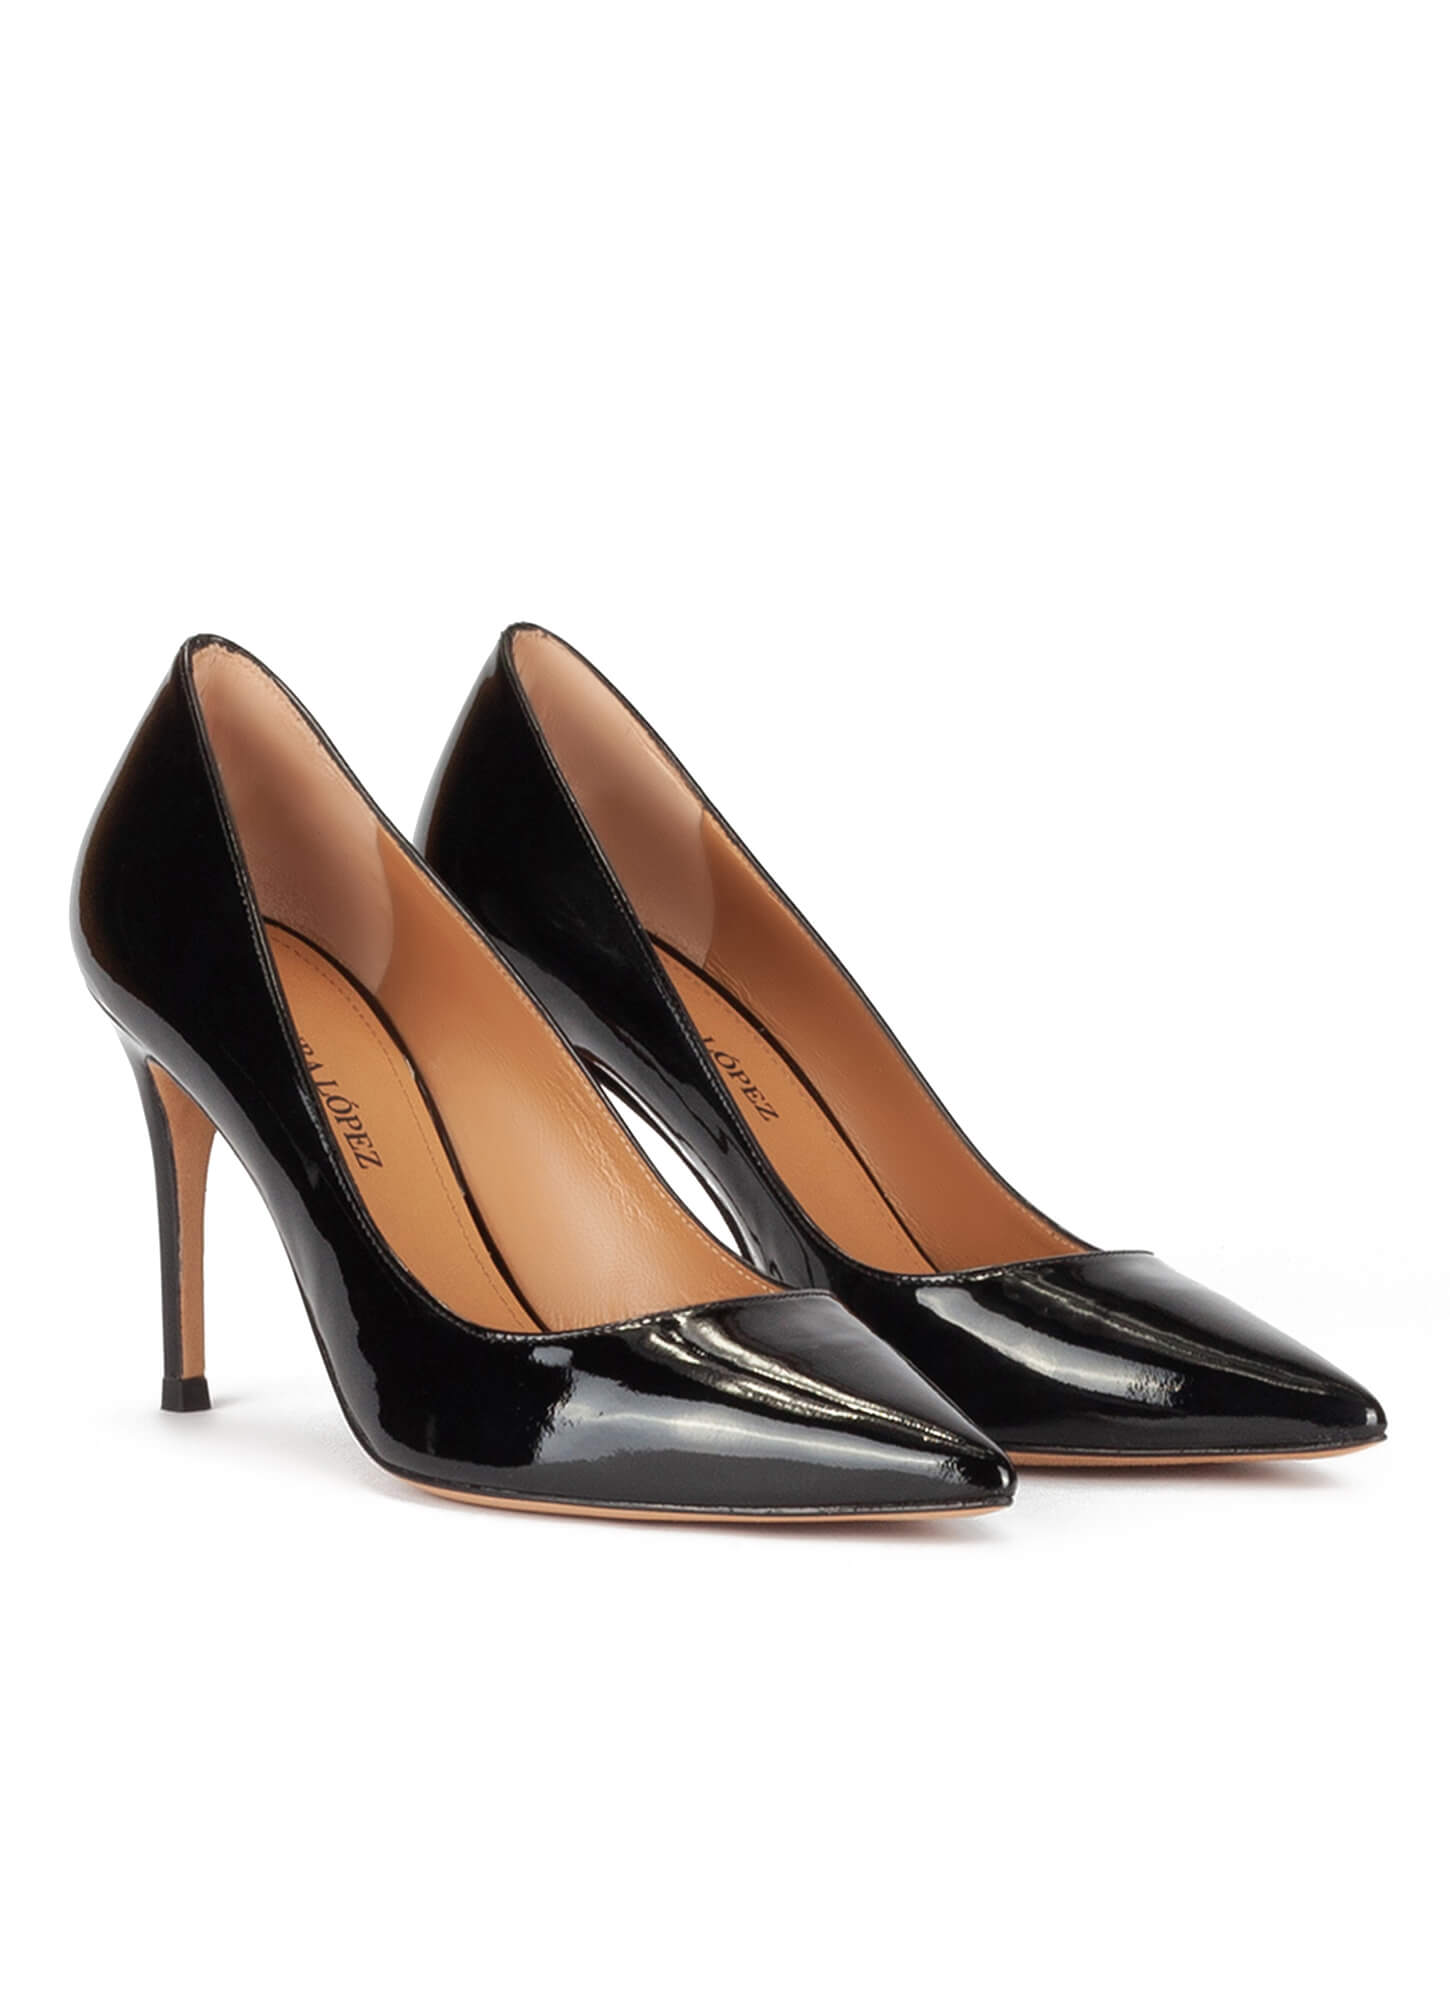 black patent pumps pointed toe